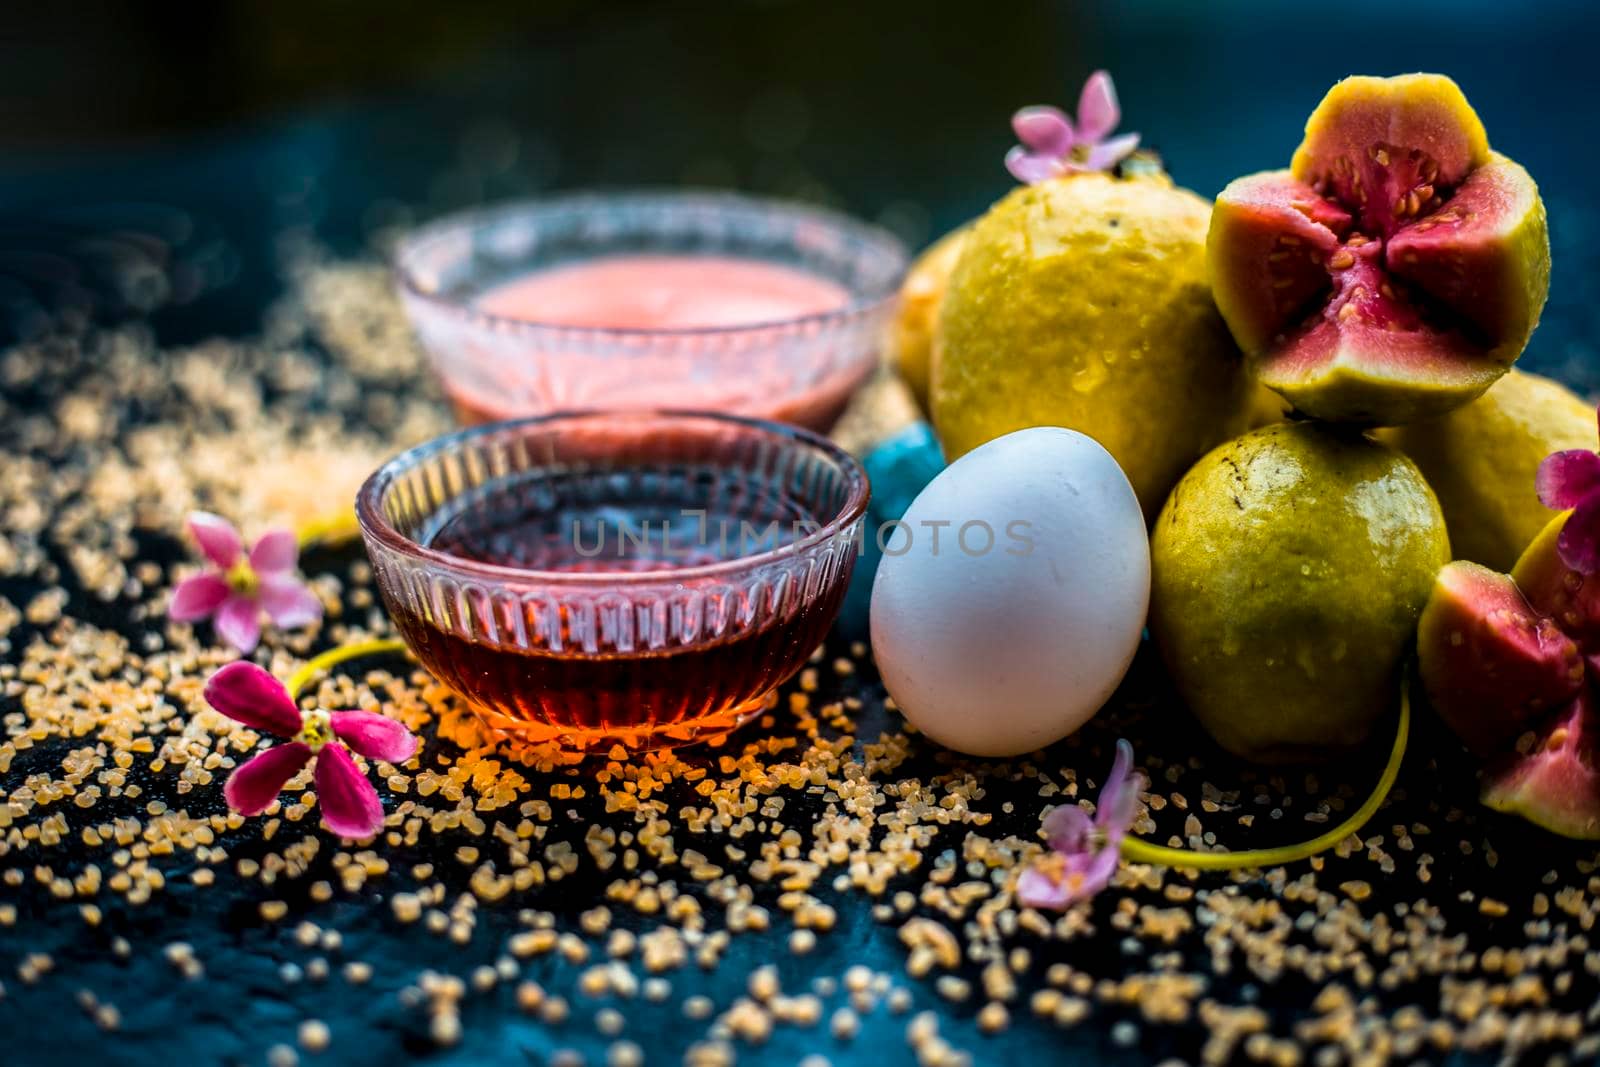 Treatment of dry skin with the help of face mask on a wooden surface consisting of honey, guava pulp, egg yolk, and some oatmeal, well mixed in a glass bowl along with raw ingredients.